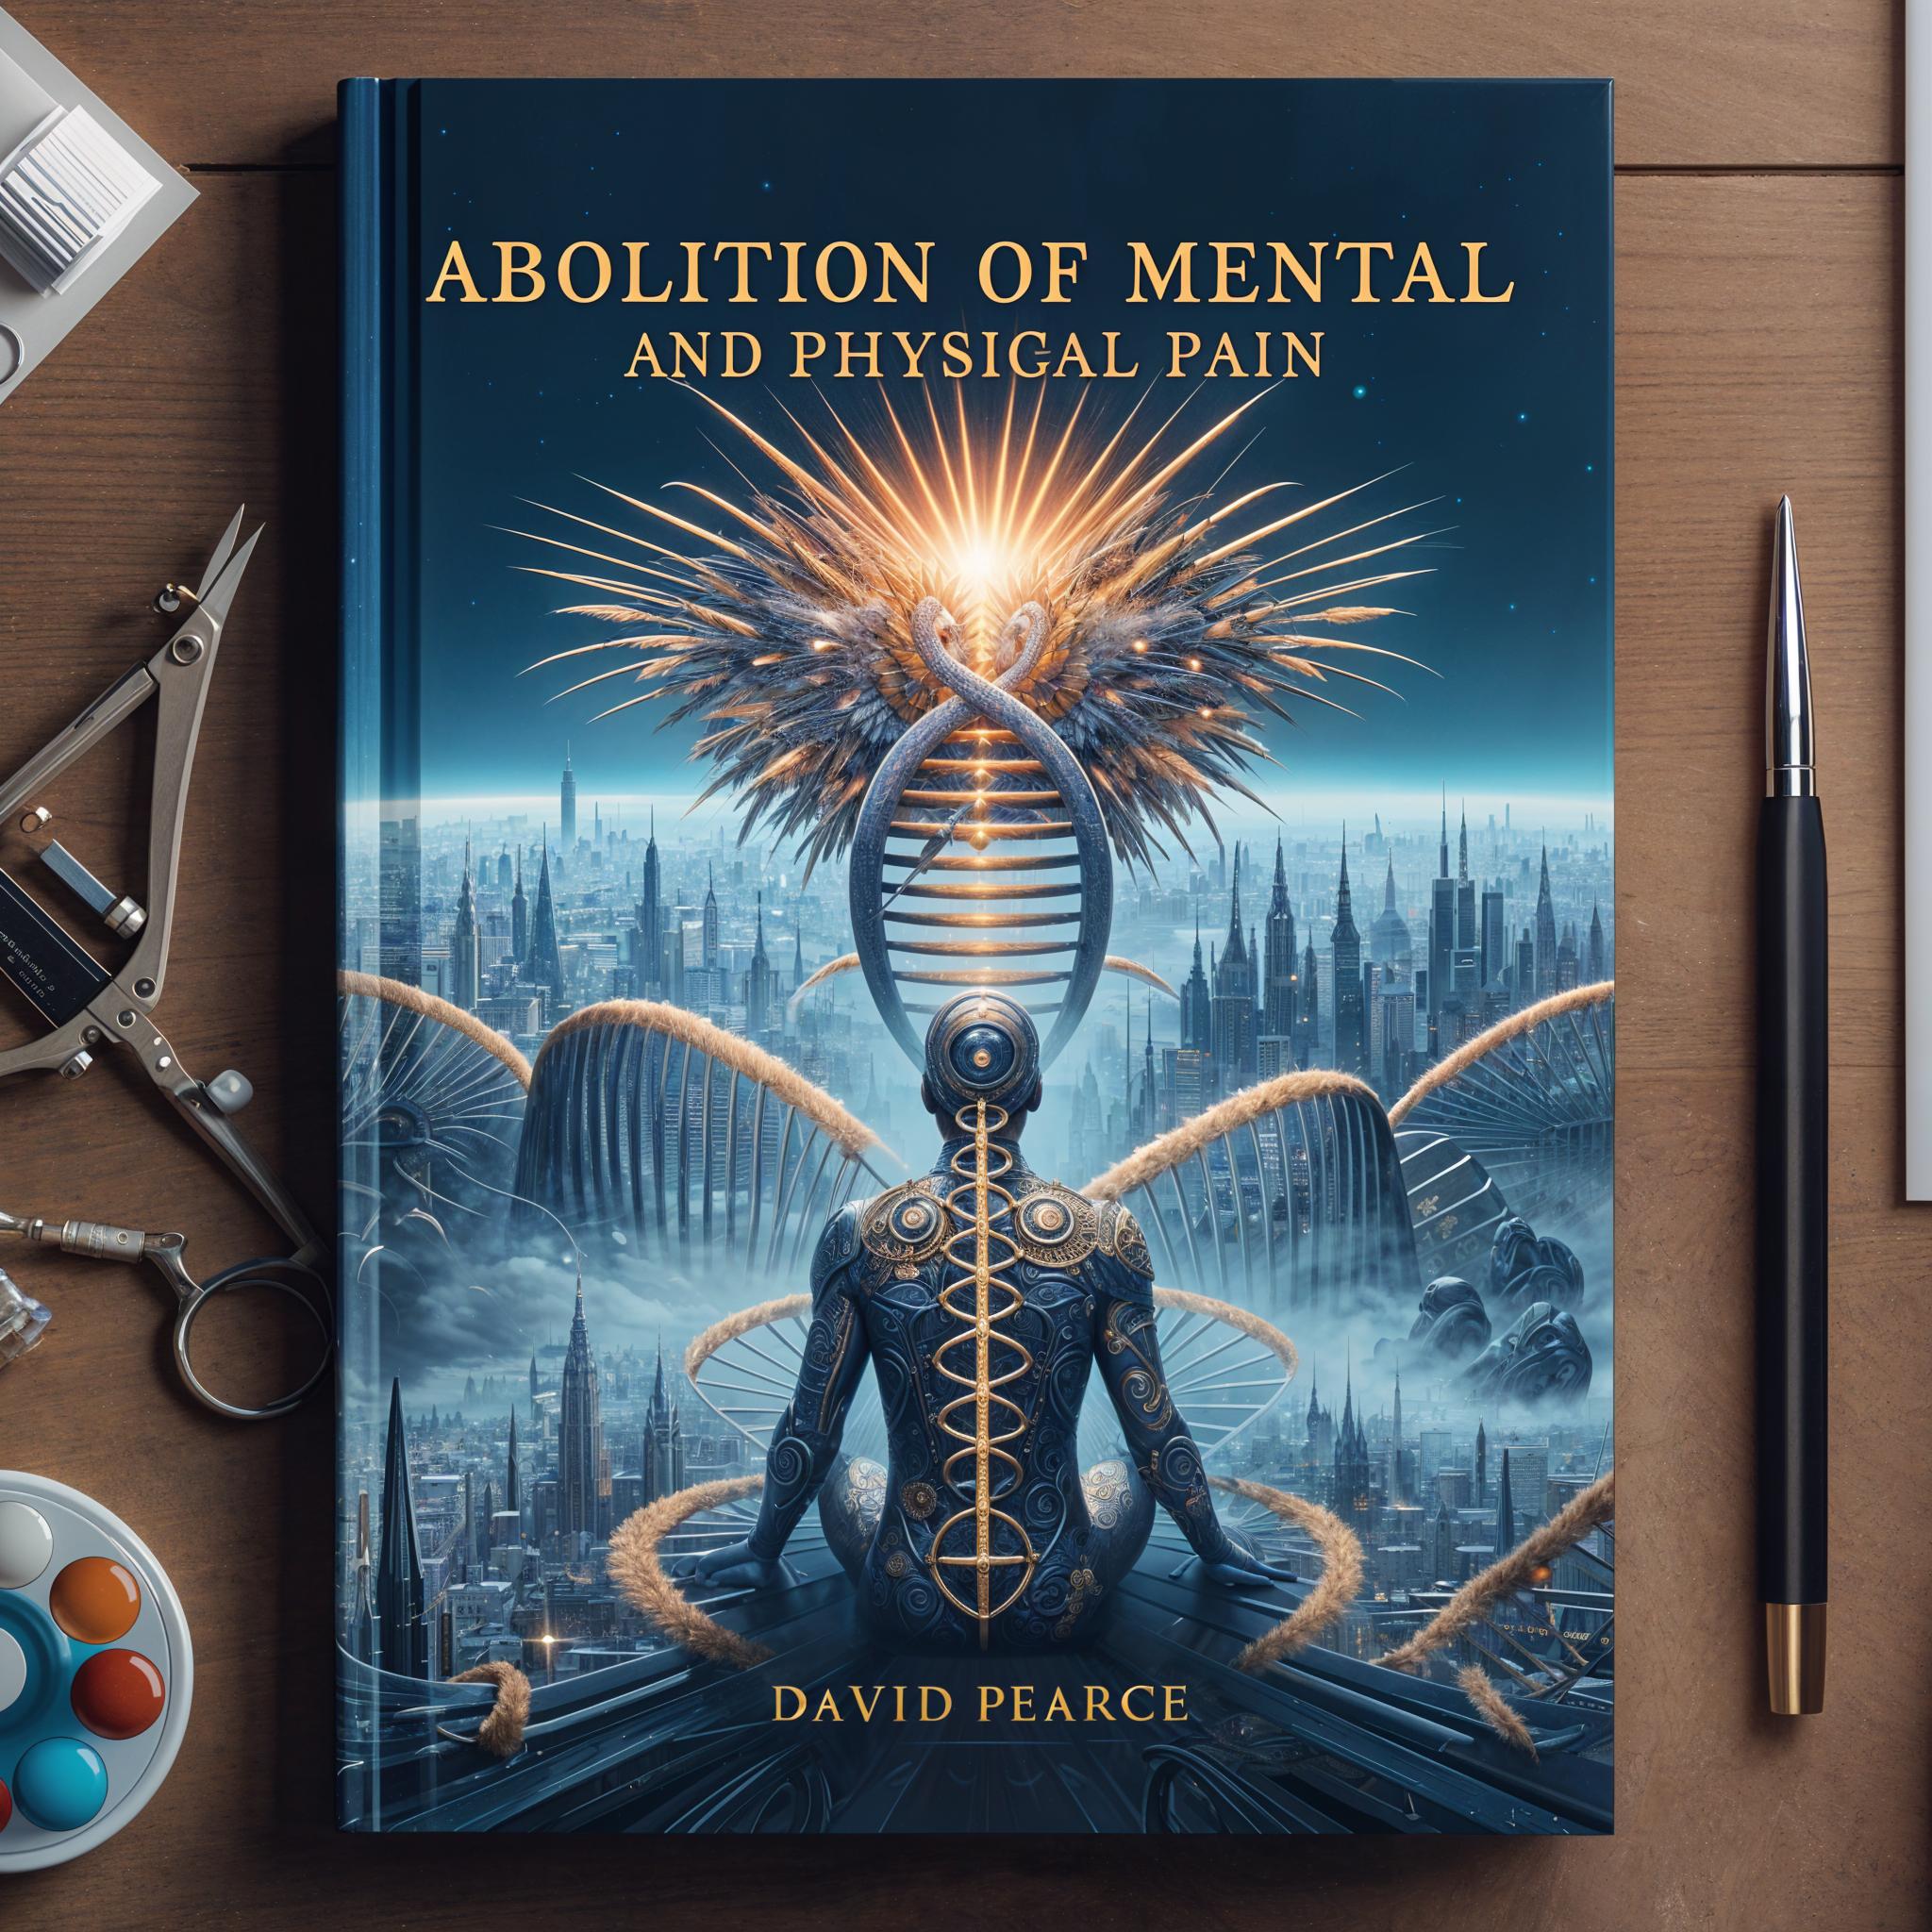 The Abolition of Mental and Physical Pain  by David Pearce